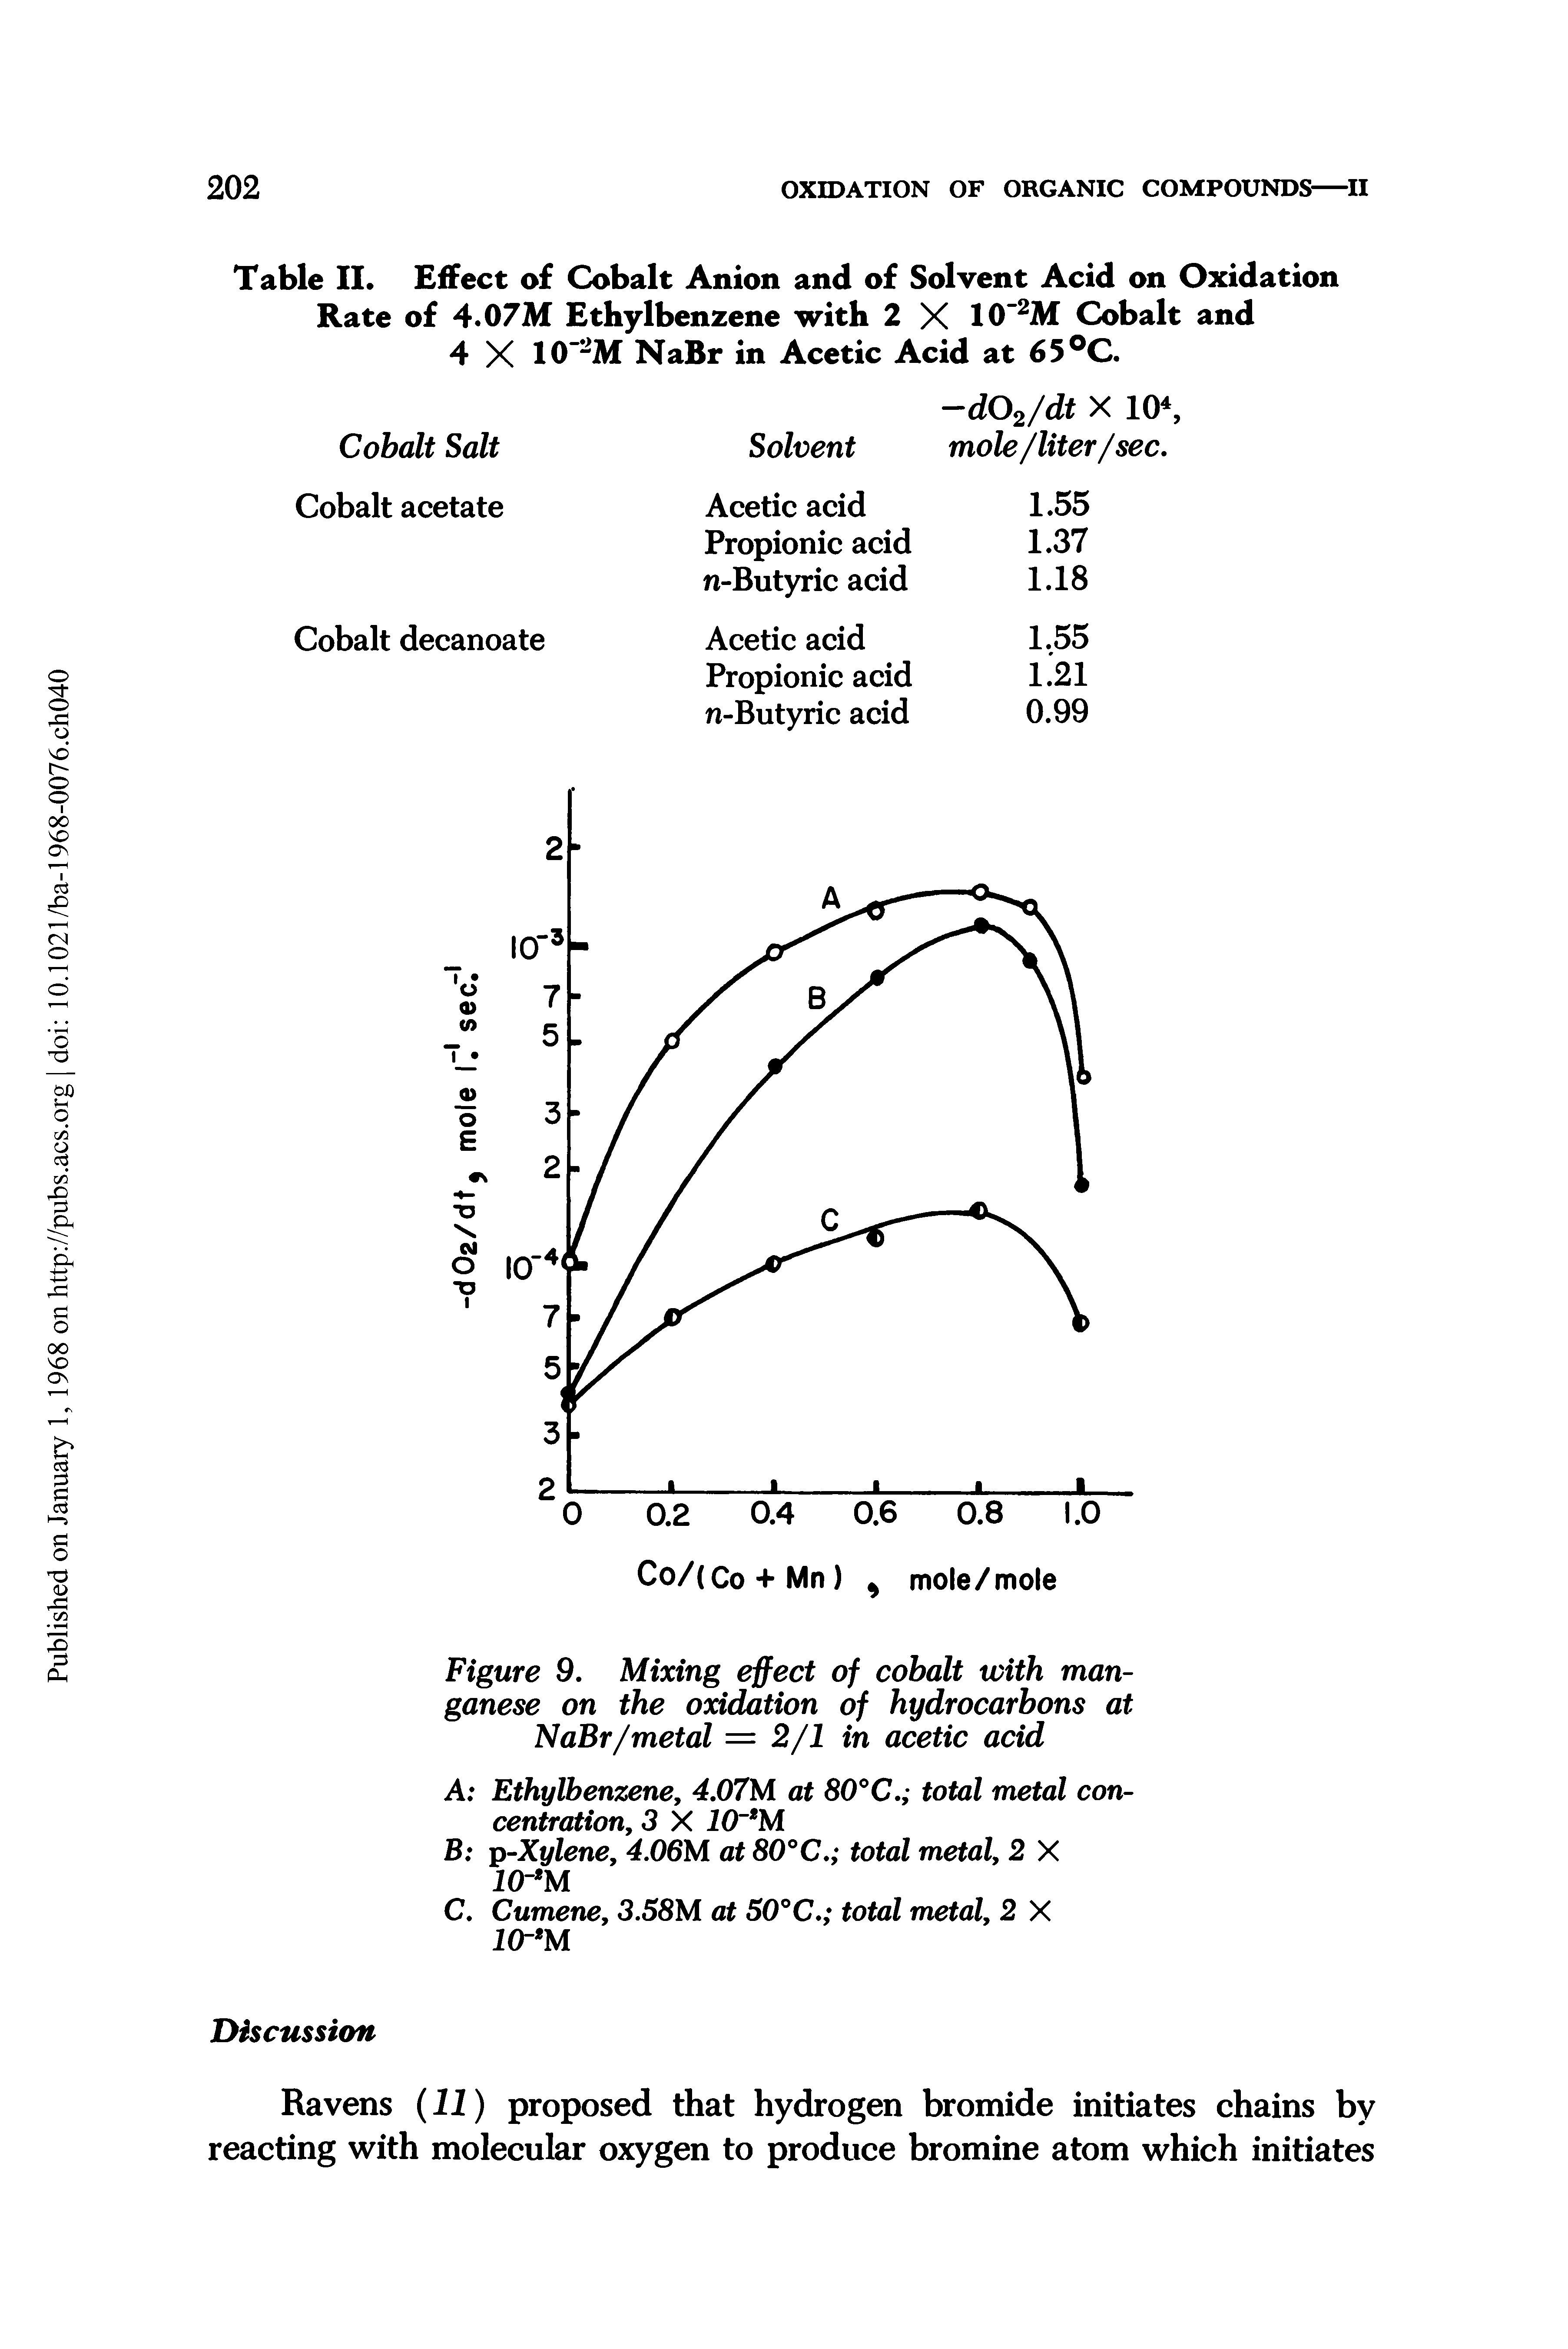 Table II, Effect of Cobalt Anion and of Solvent Acid on Oxidation Rate of 4.07M Ethylbenzene with 2 X 10"2M Cobalt and 4 X 10"2M NaBr in Acetic Acid at 65°C.